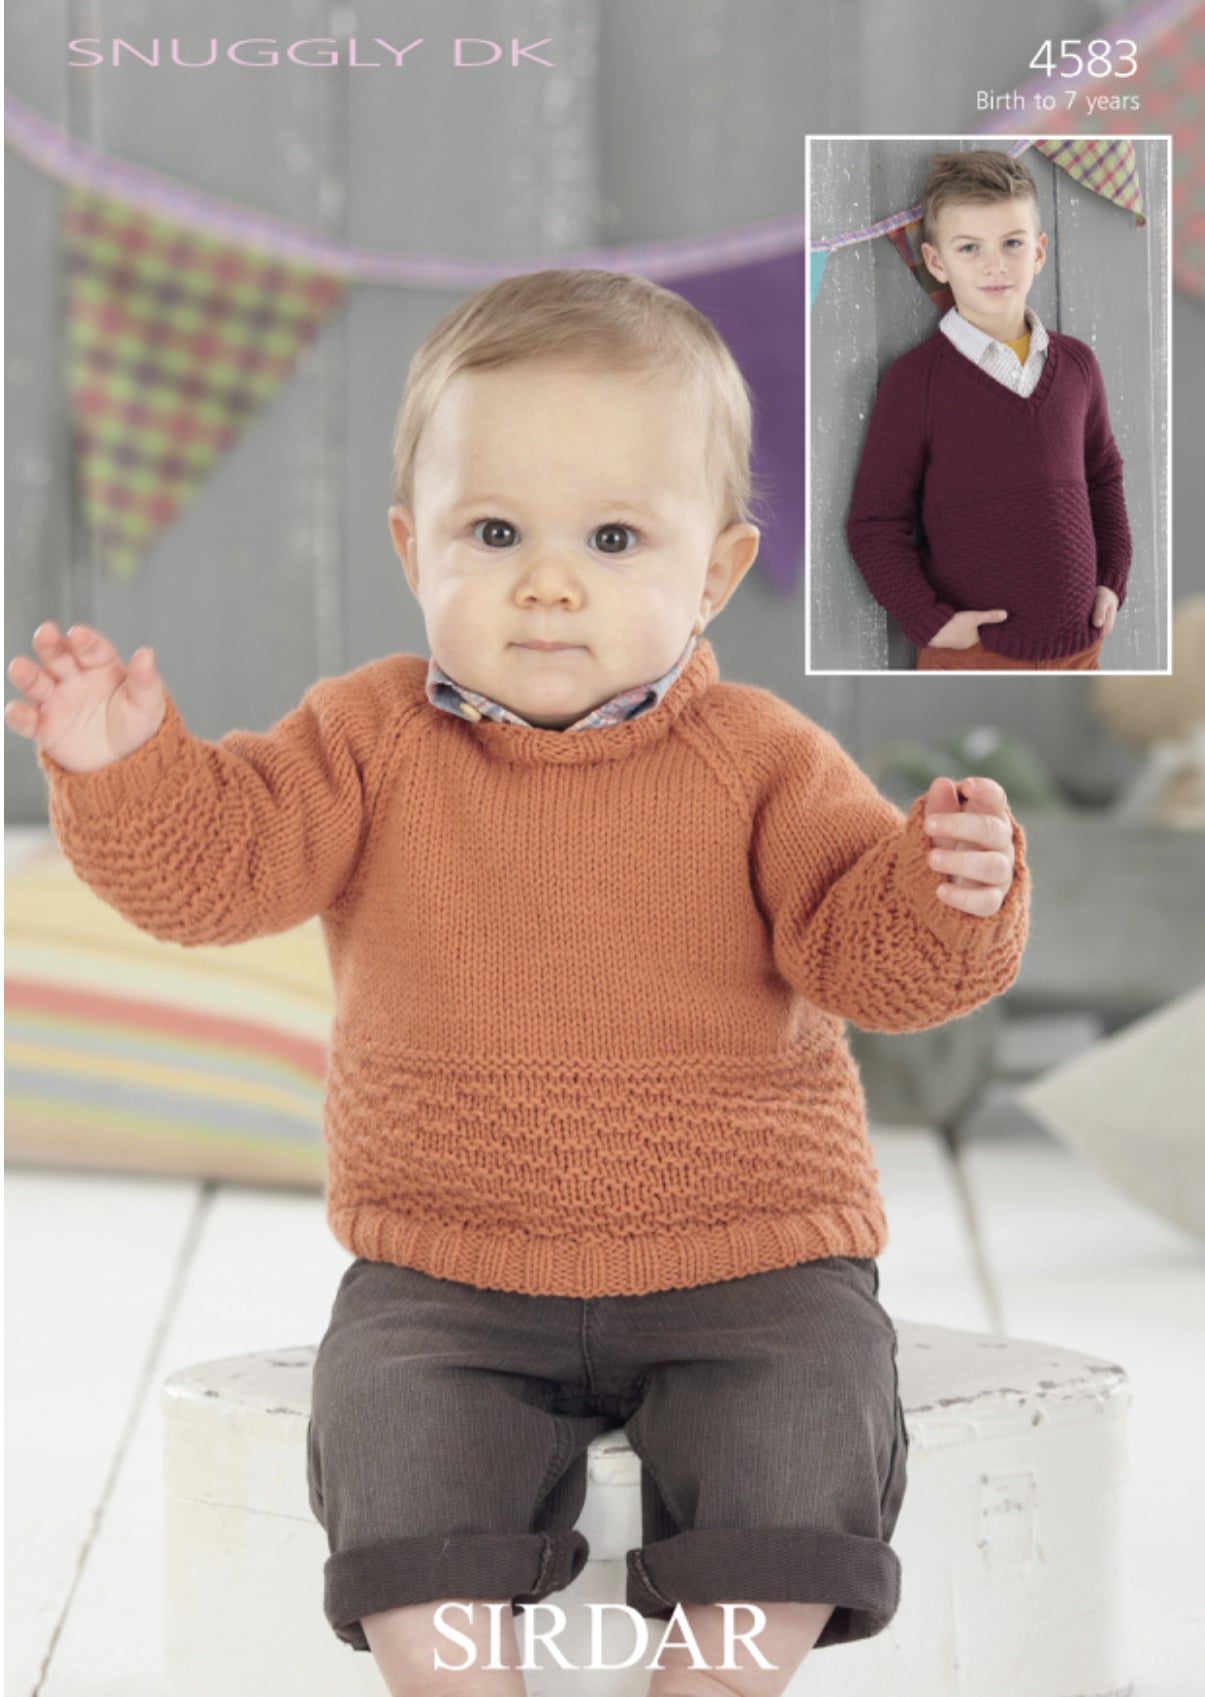 Sirdar 4583 Round Neck and V Neck Sweaters in Snuggly DK